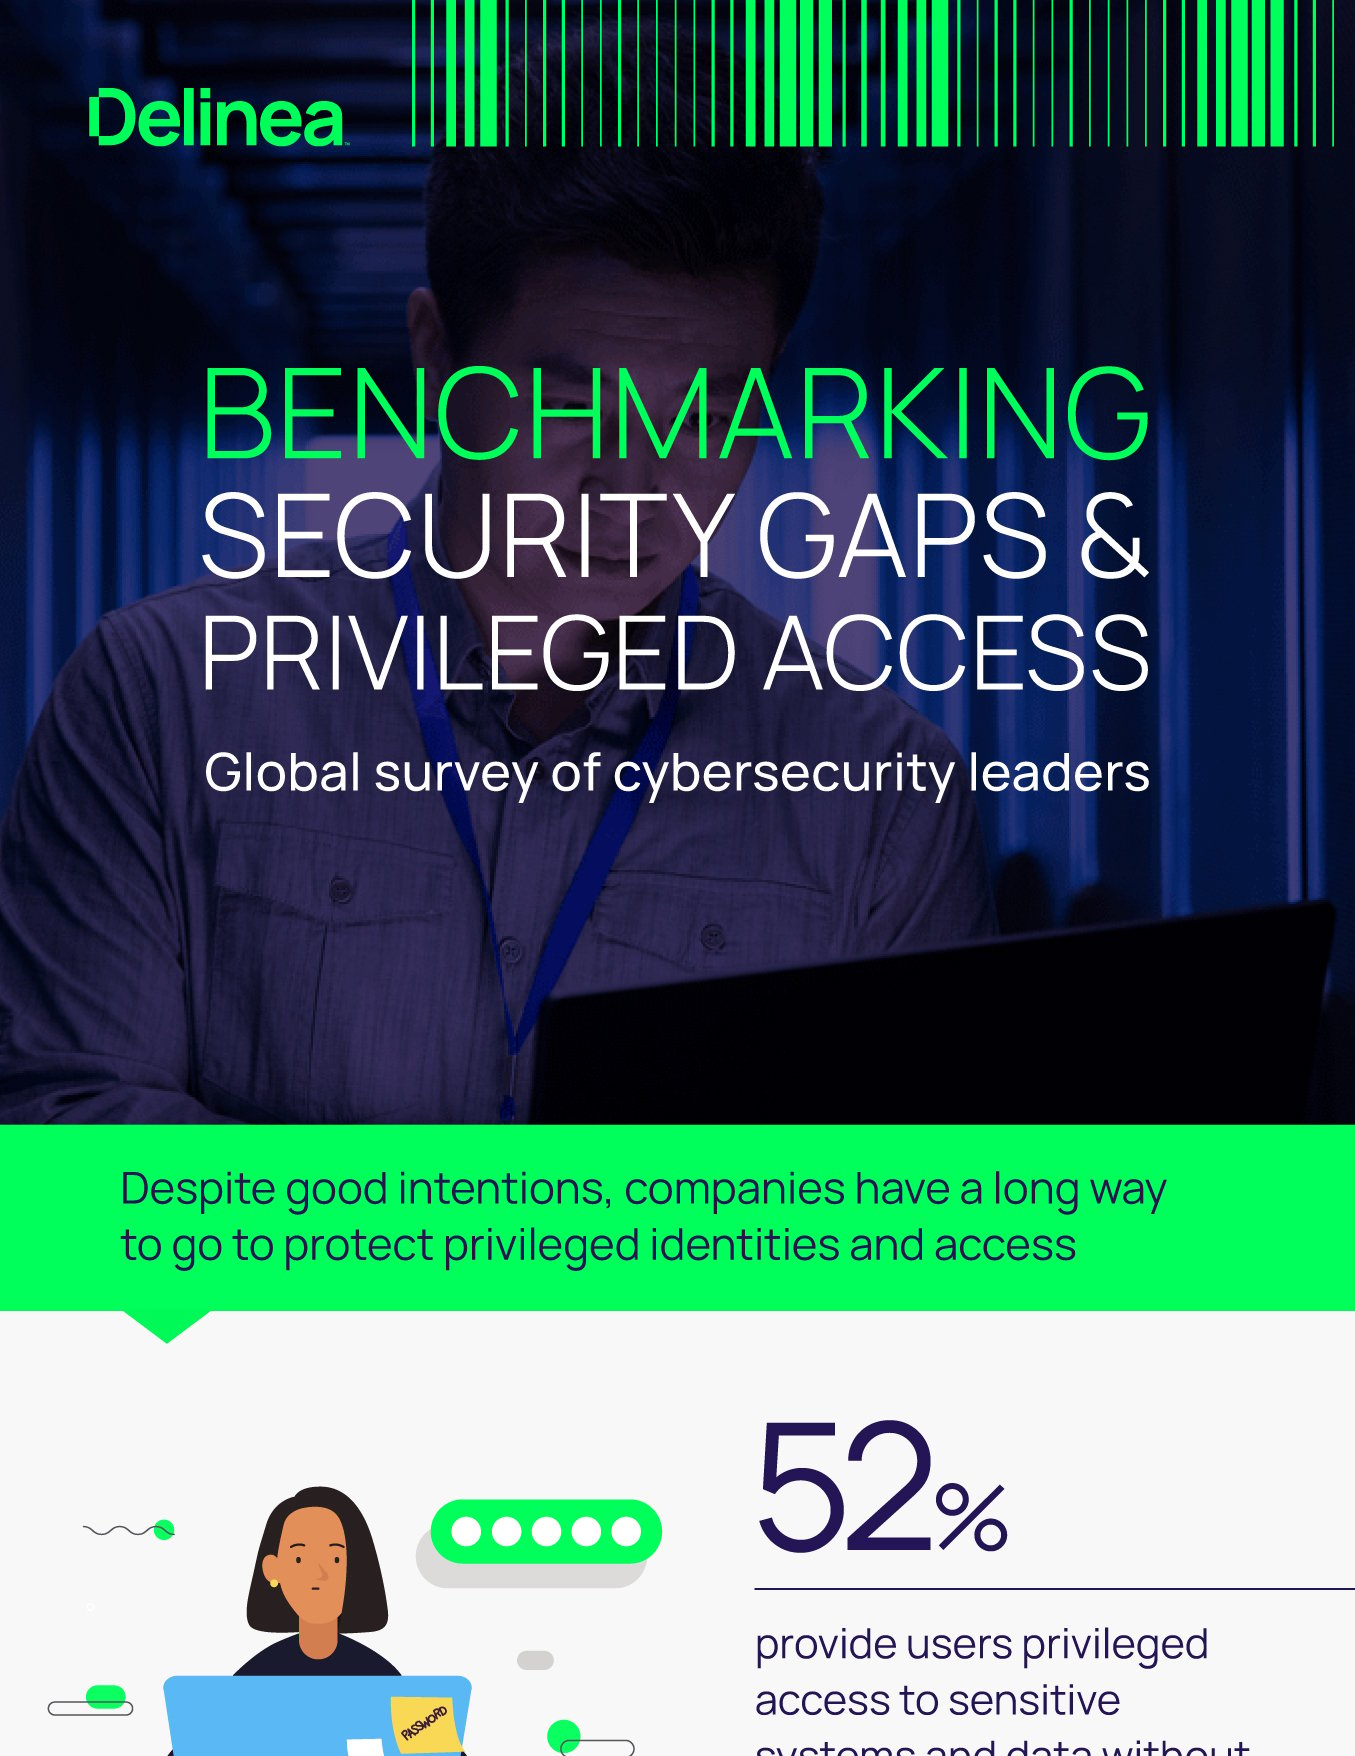 Global Survey of Cybersecurity Leaders: Benchmarking Security Gaps and Privileged Access